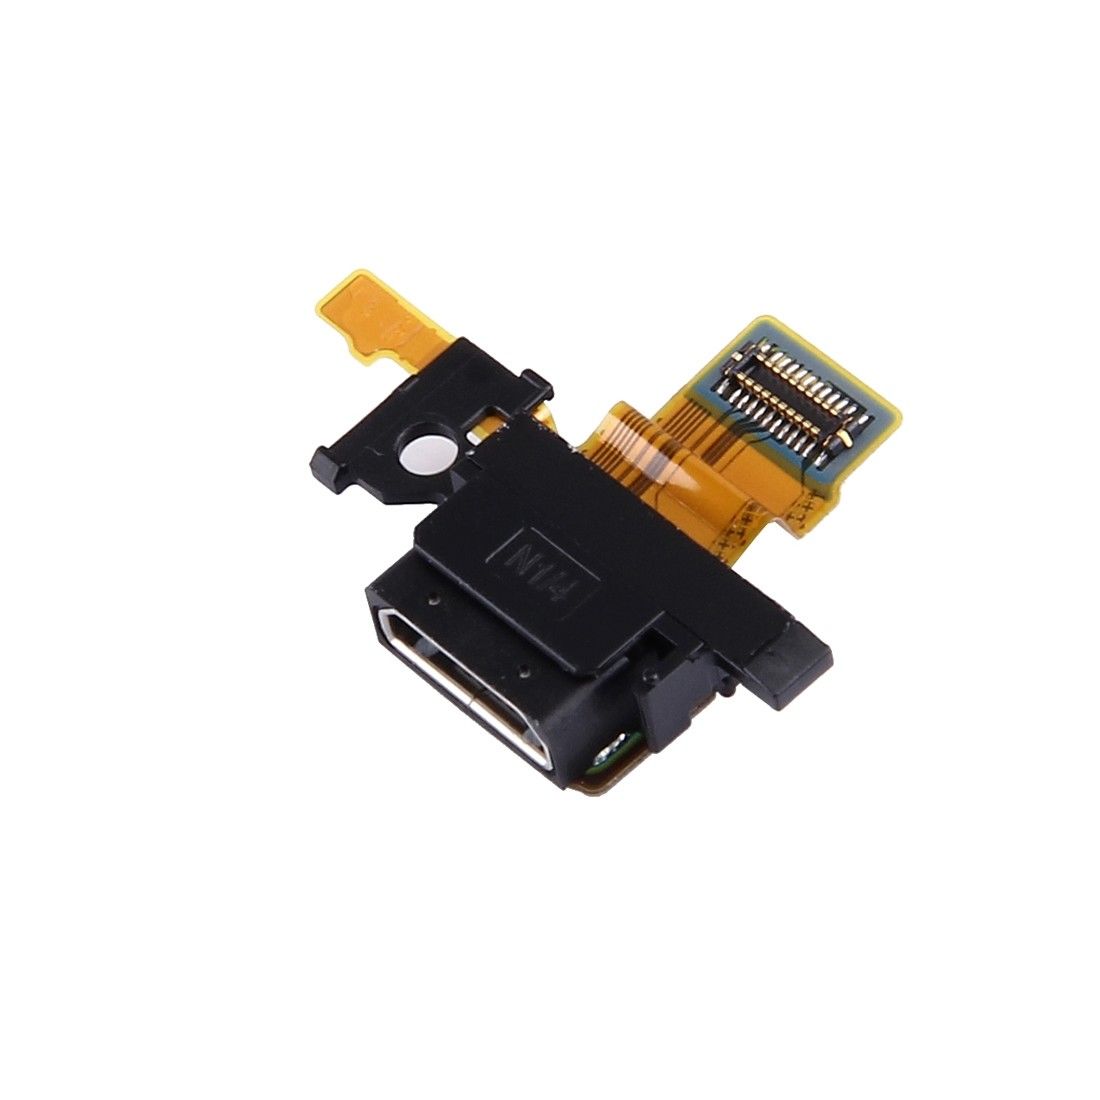 Sony Xperia X Micro USB Charging Port Flex Cable for [product_price] - First Help Tech